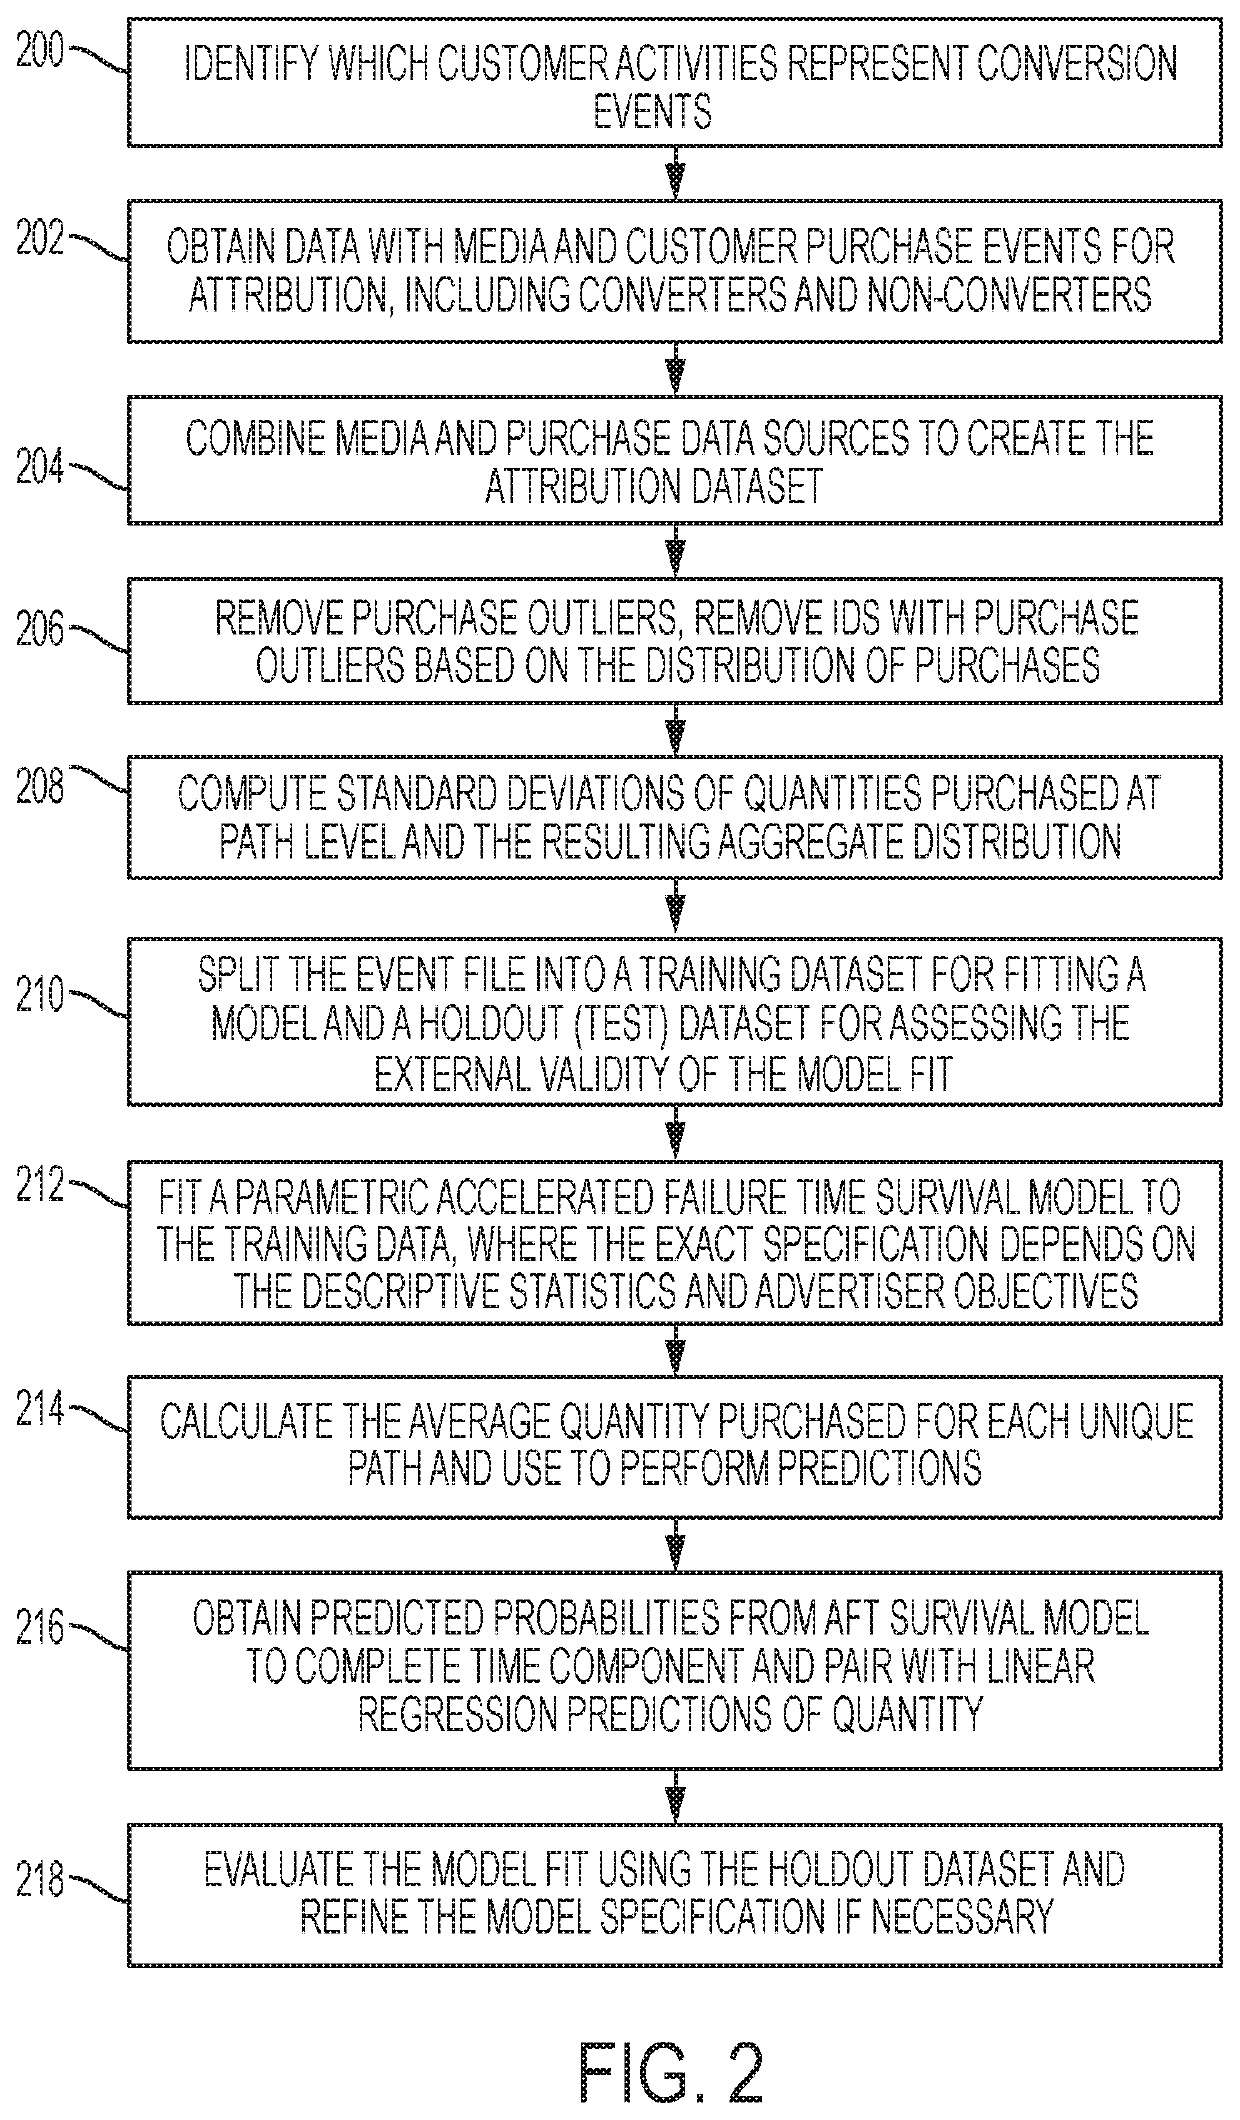 Method and system to account for timing and quantity purchased in attribution models in advertising